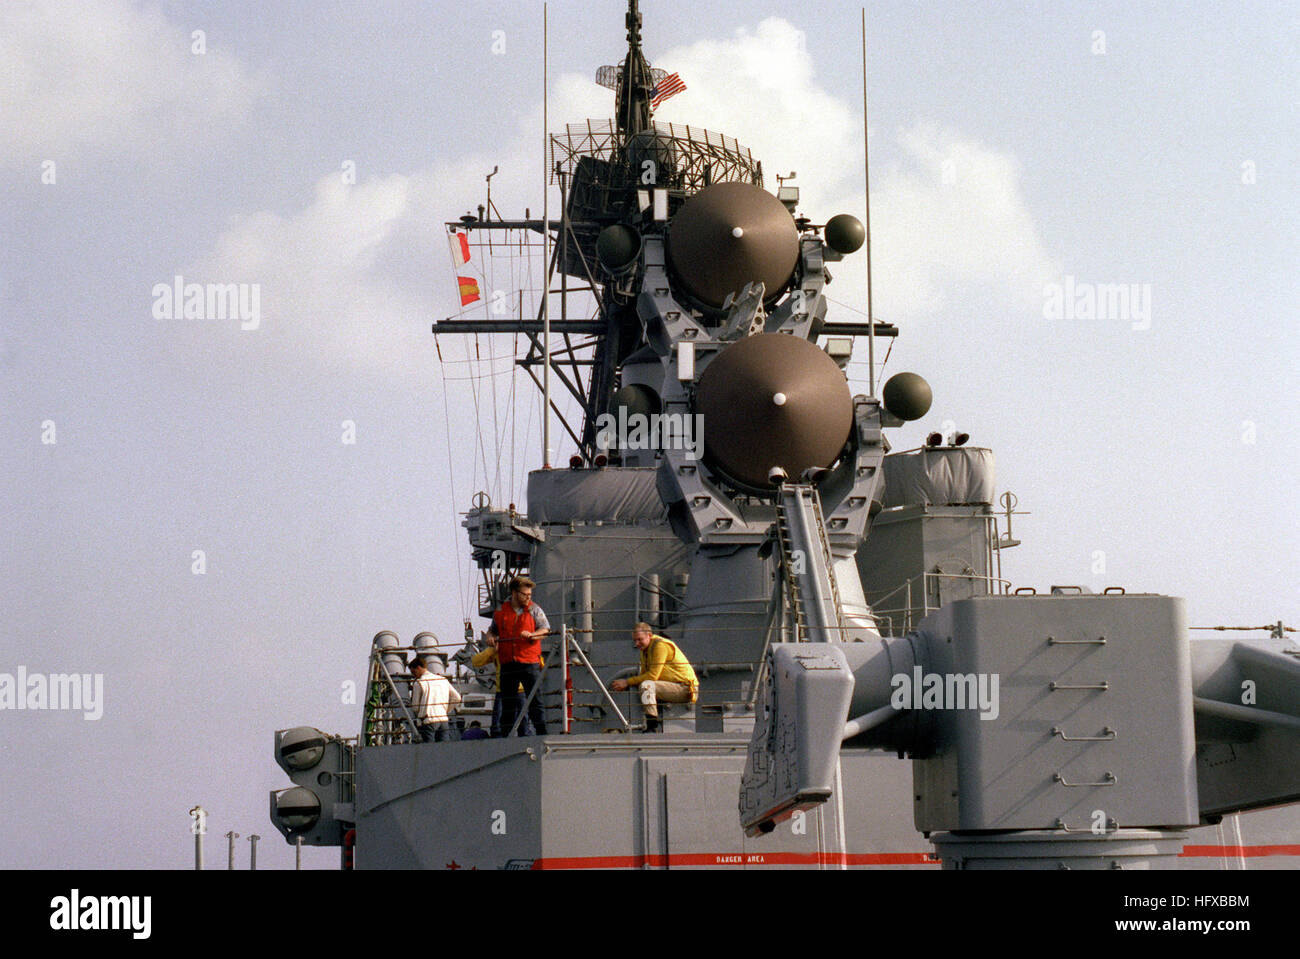 Crew members take a break under the twin SPG-55B fire control radar systems aboard the guided missile destroyer USS MAHAN (DDG-42).  The ship's Mark 10 Mod O Terrier/Standard missile lauancher is in the foreground. USS Mahan SPG-55B radars Stock Photo